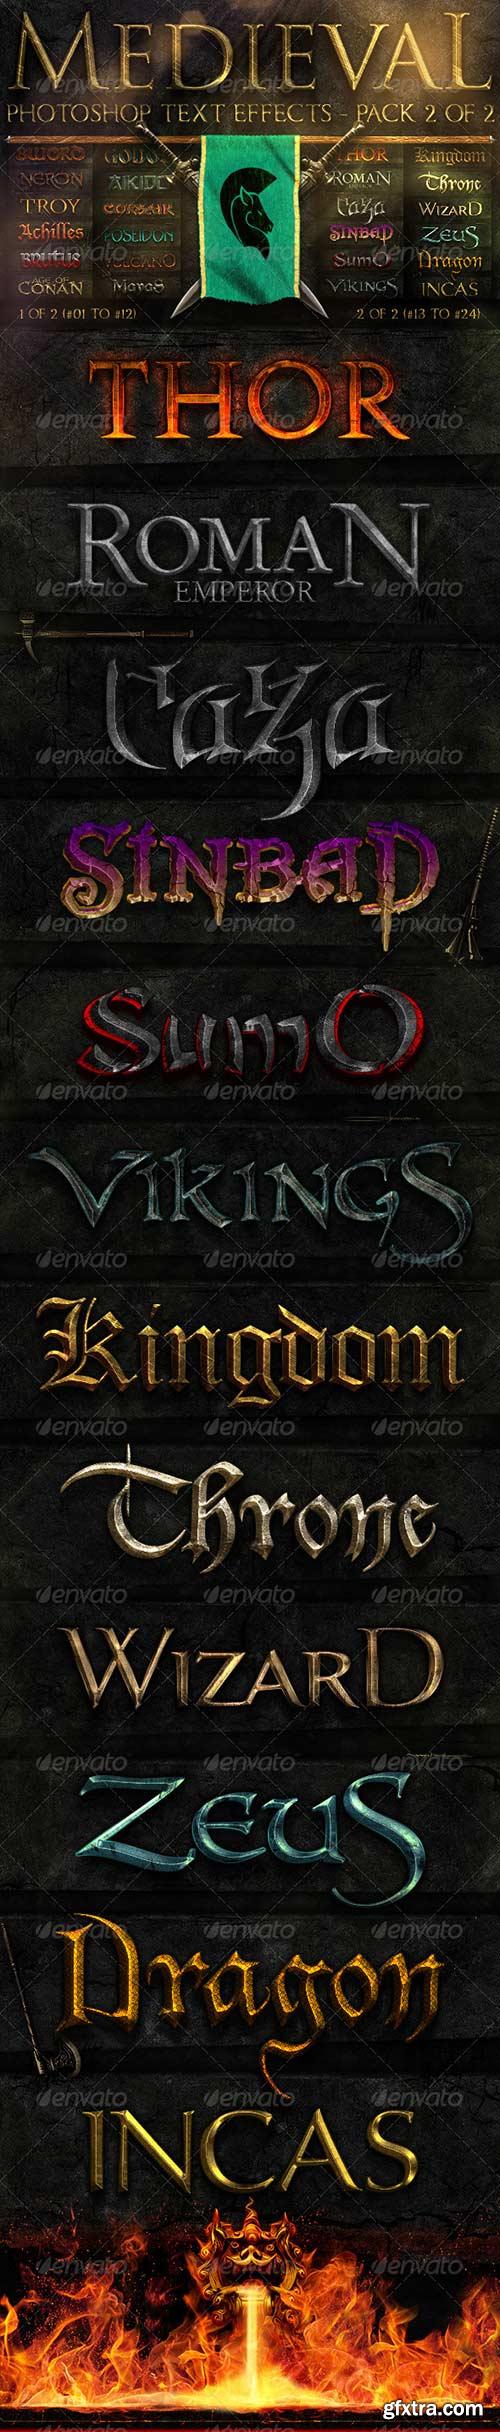 Graphicriver - Medieval Photoshop Text Effects 2 of 2